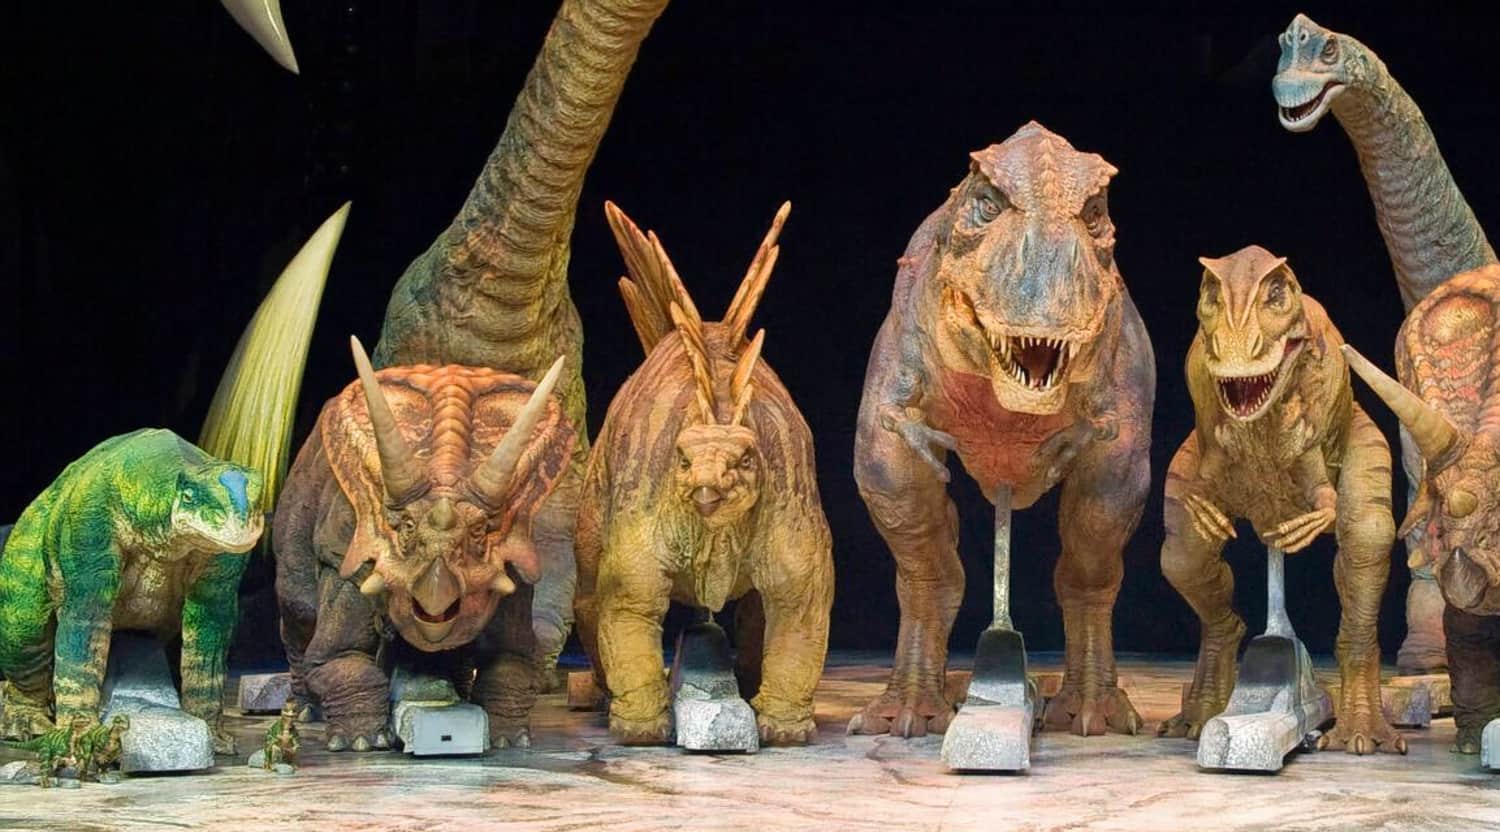 tickets walking with dinosaurs